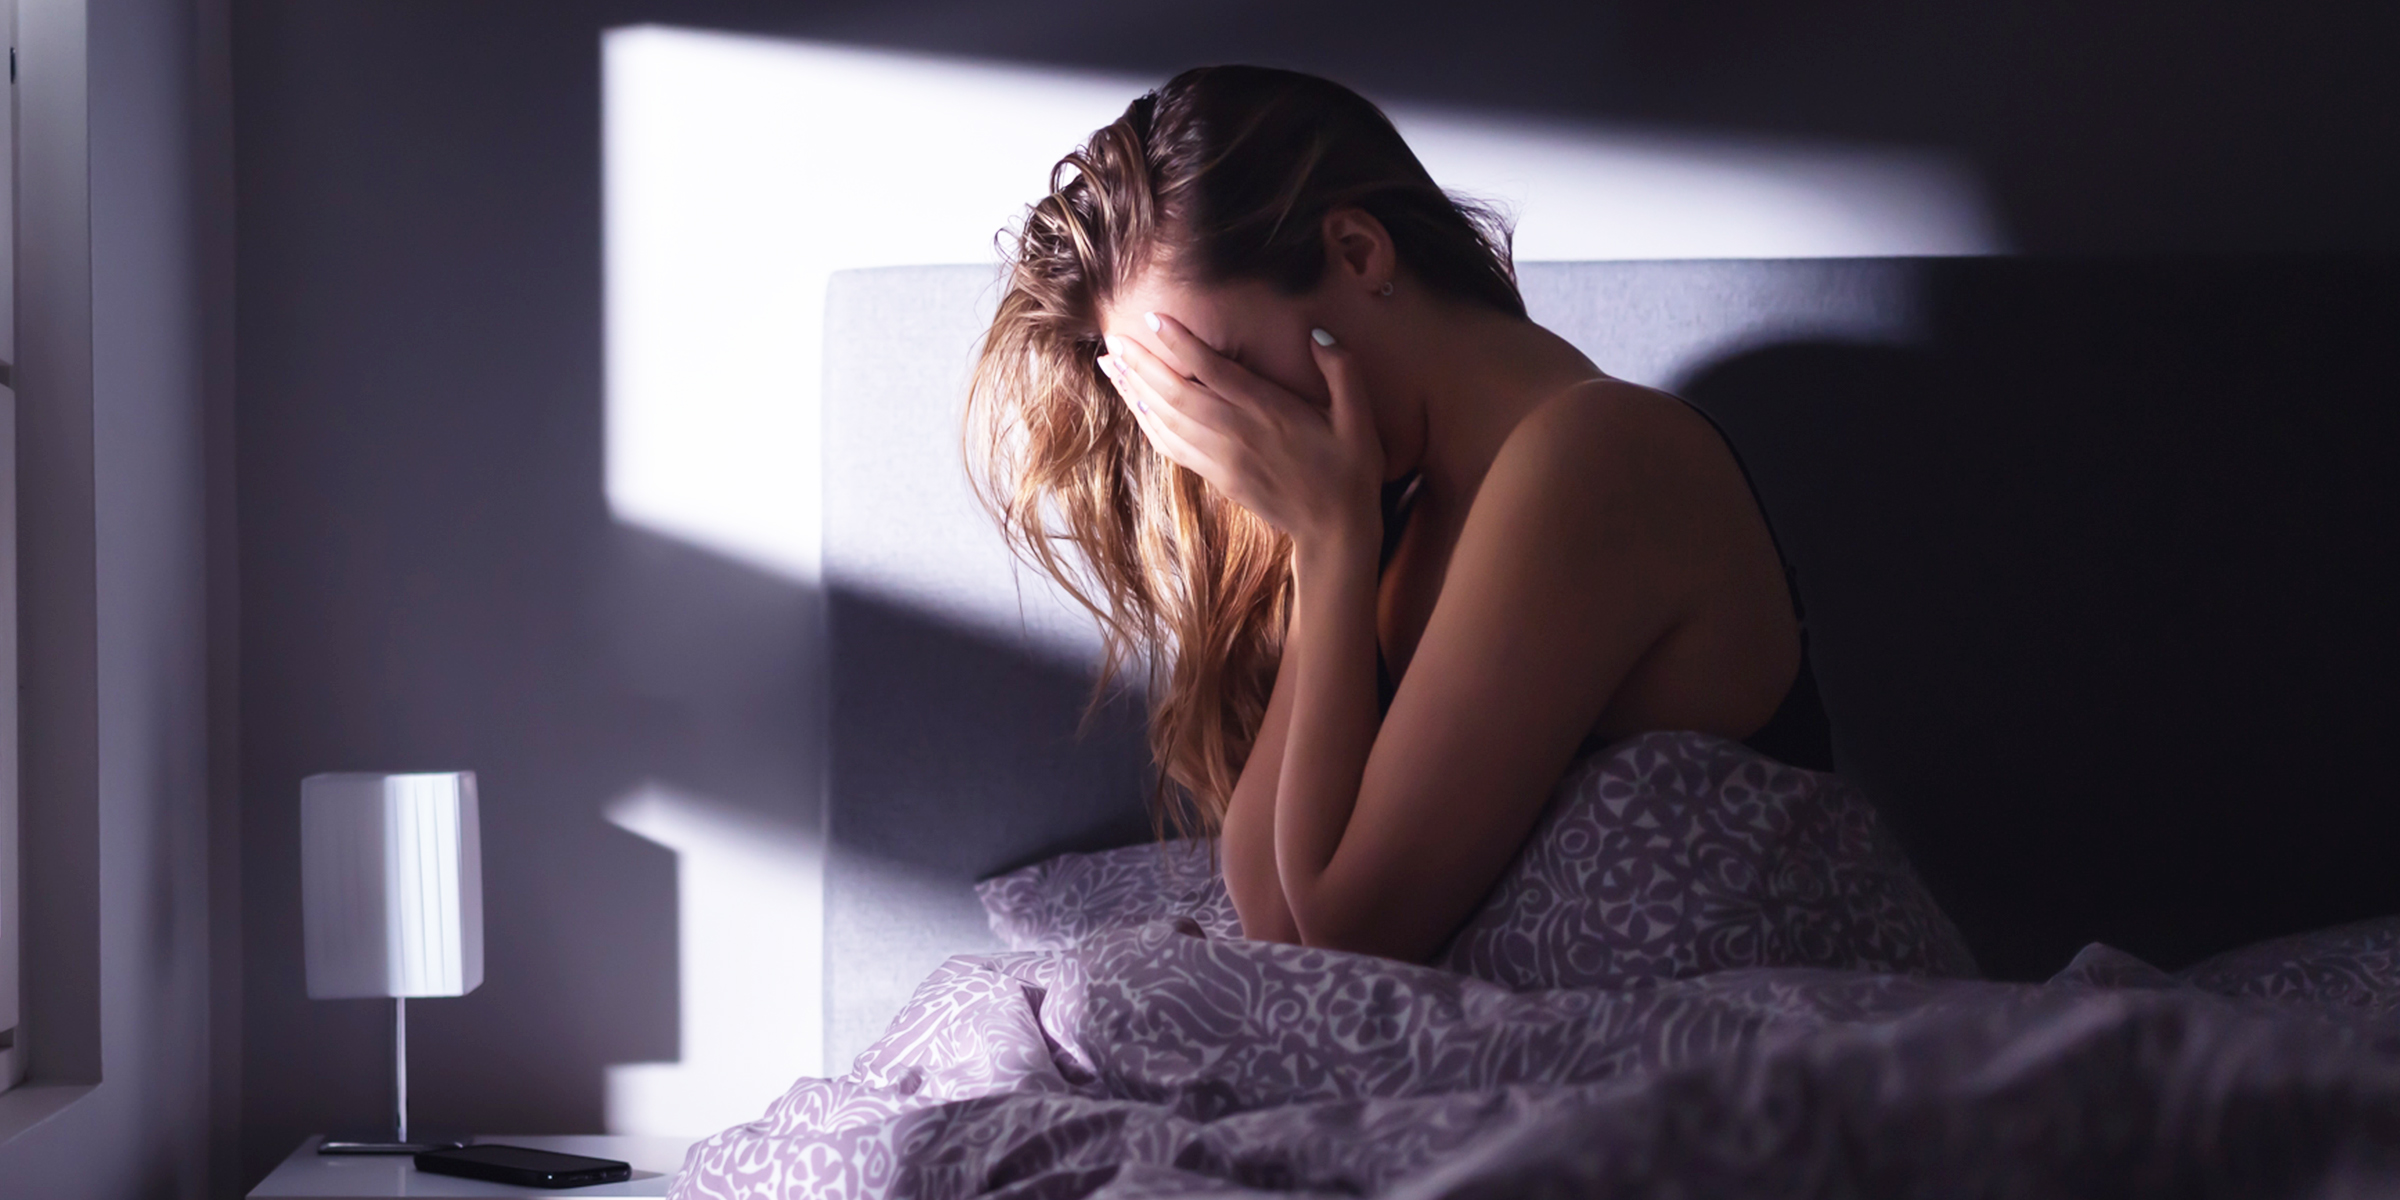 A Woman Is Pictured Crying in Bed | Source: Shutterstock